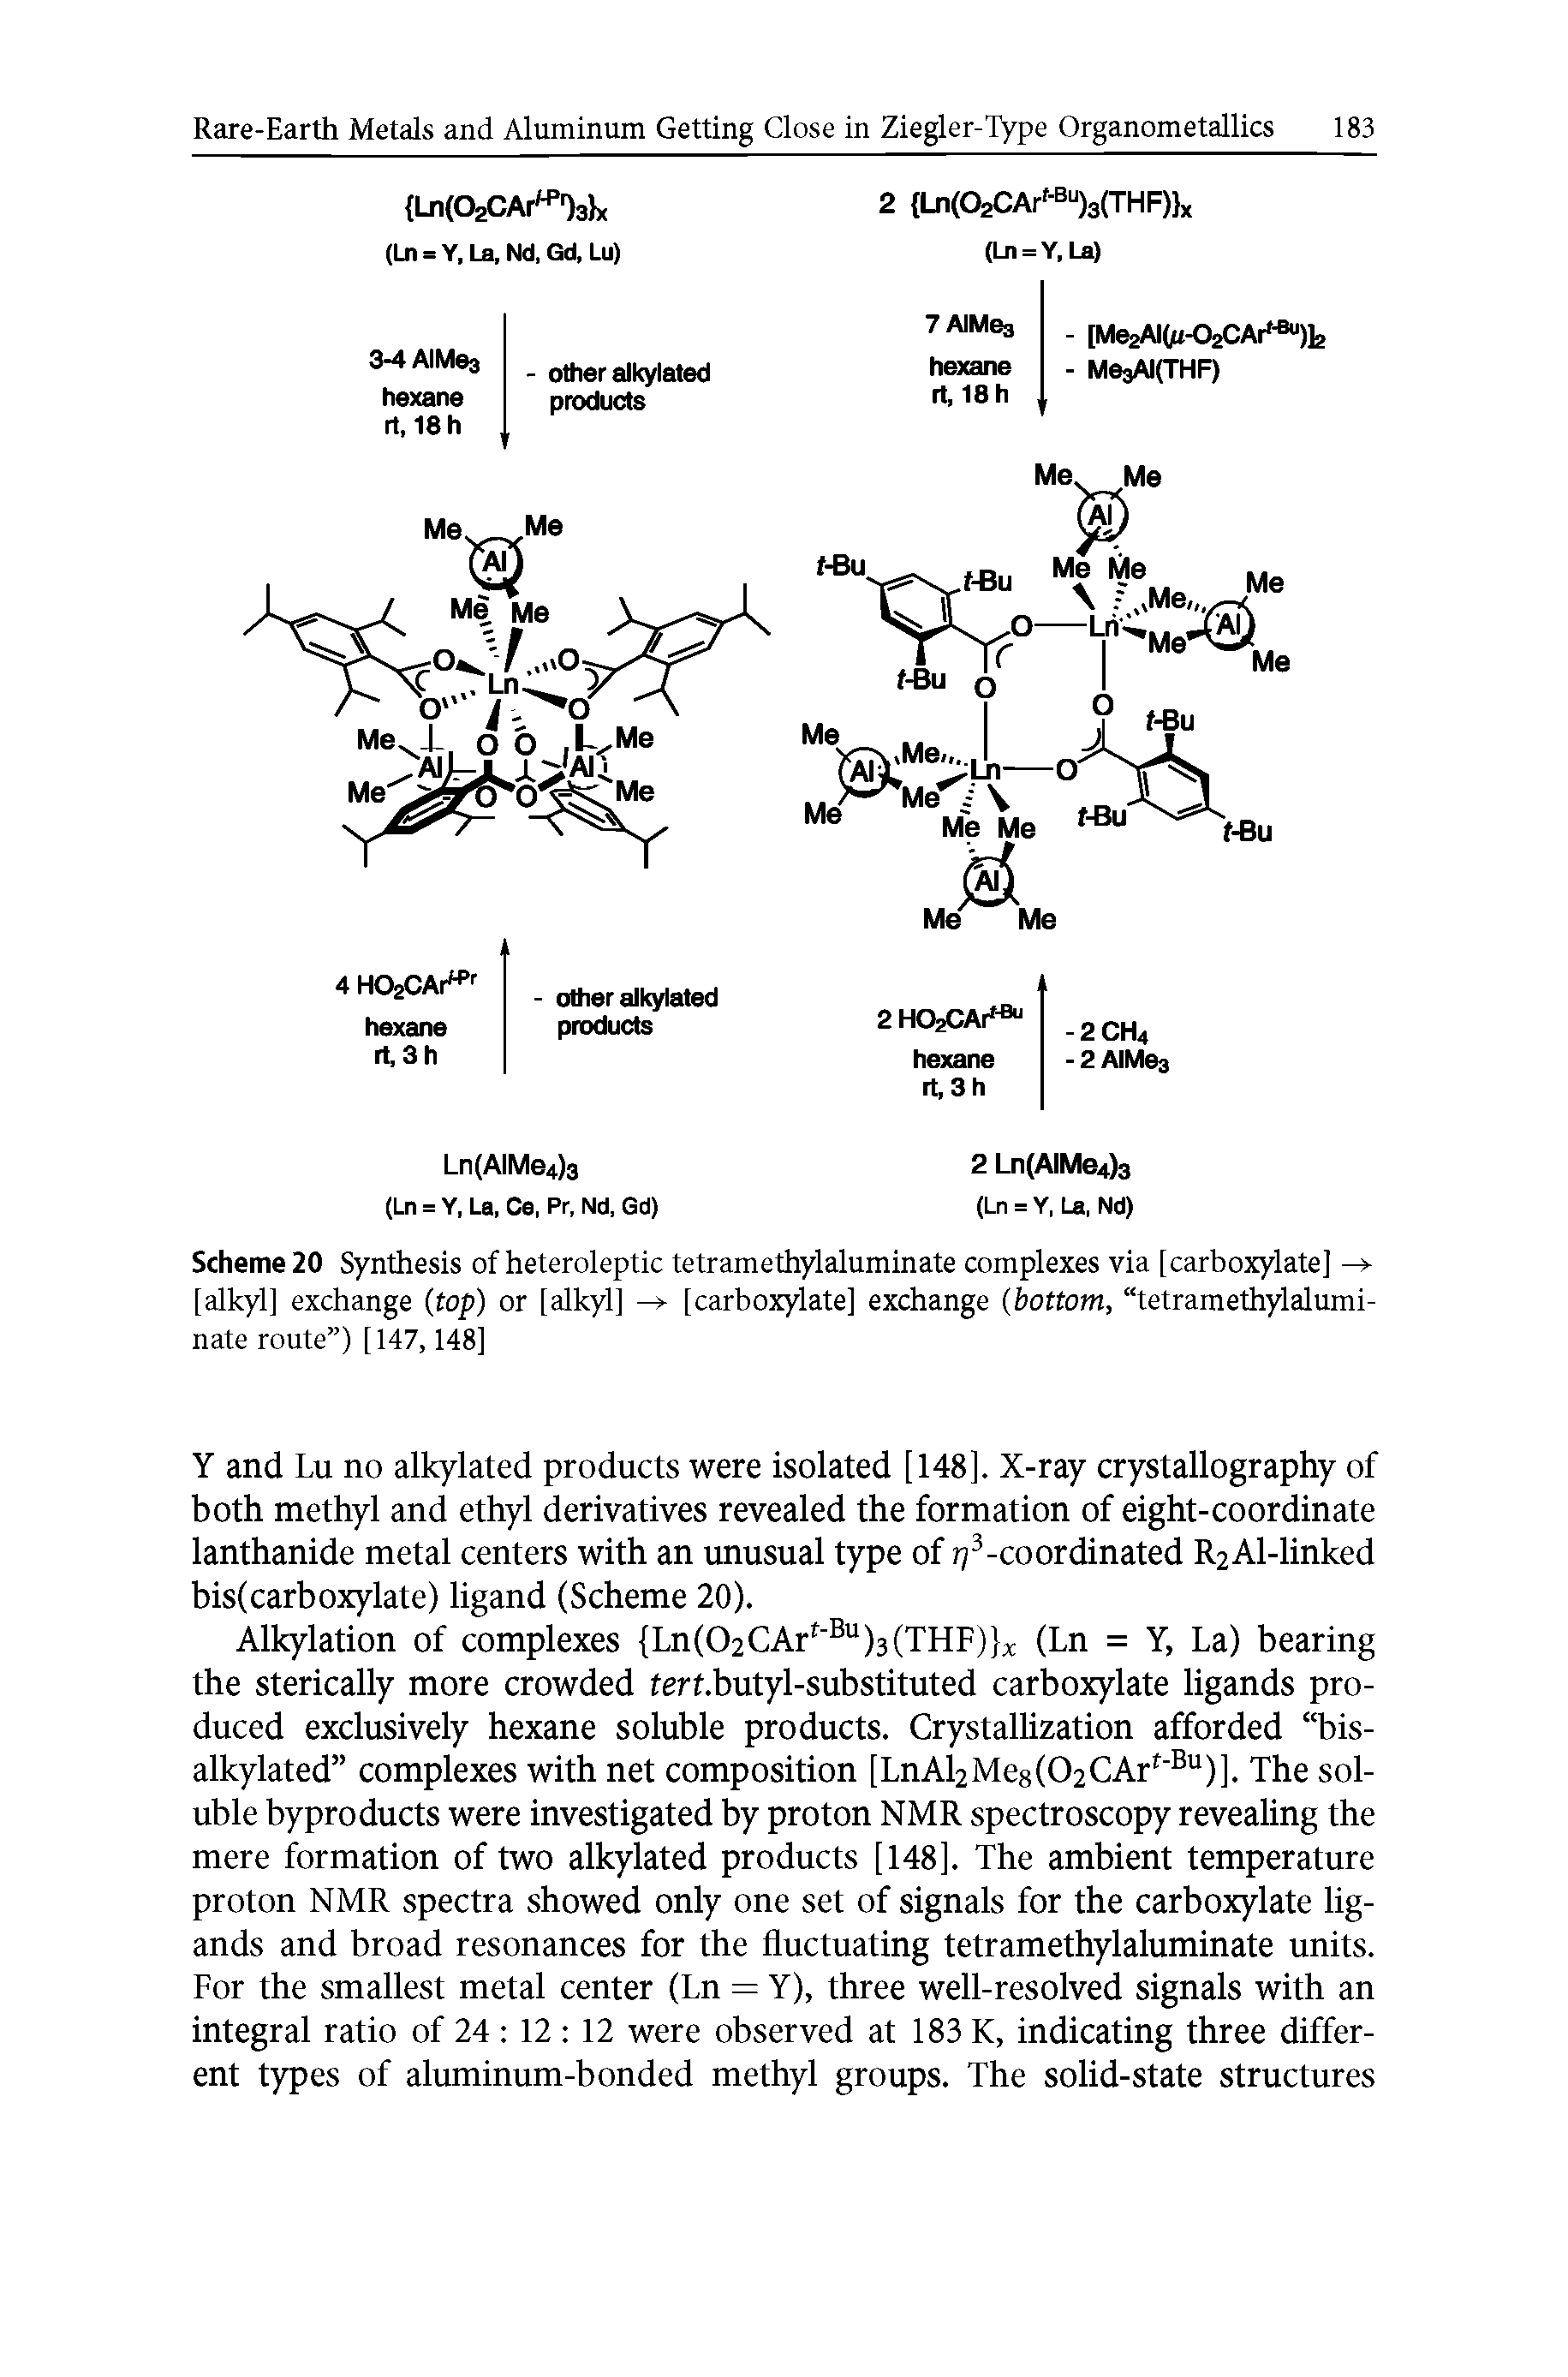 Scheme 20 Synthesis of heteroleptic tetramethylaluminate complexes via [carboxylate] [alkyl] exchange (top) or [alkyl] - [carboxylate] exchange (bottom, tetramethylaluminate route ) [147,148]...